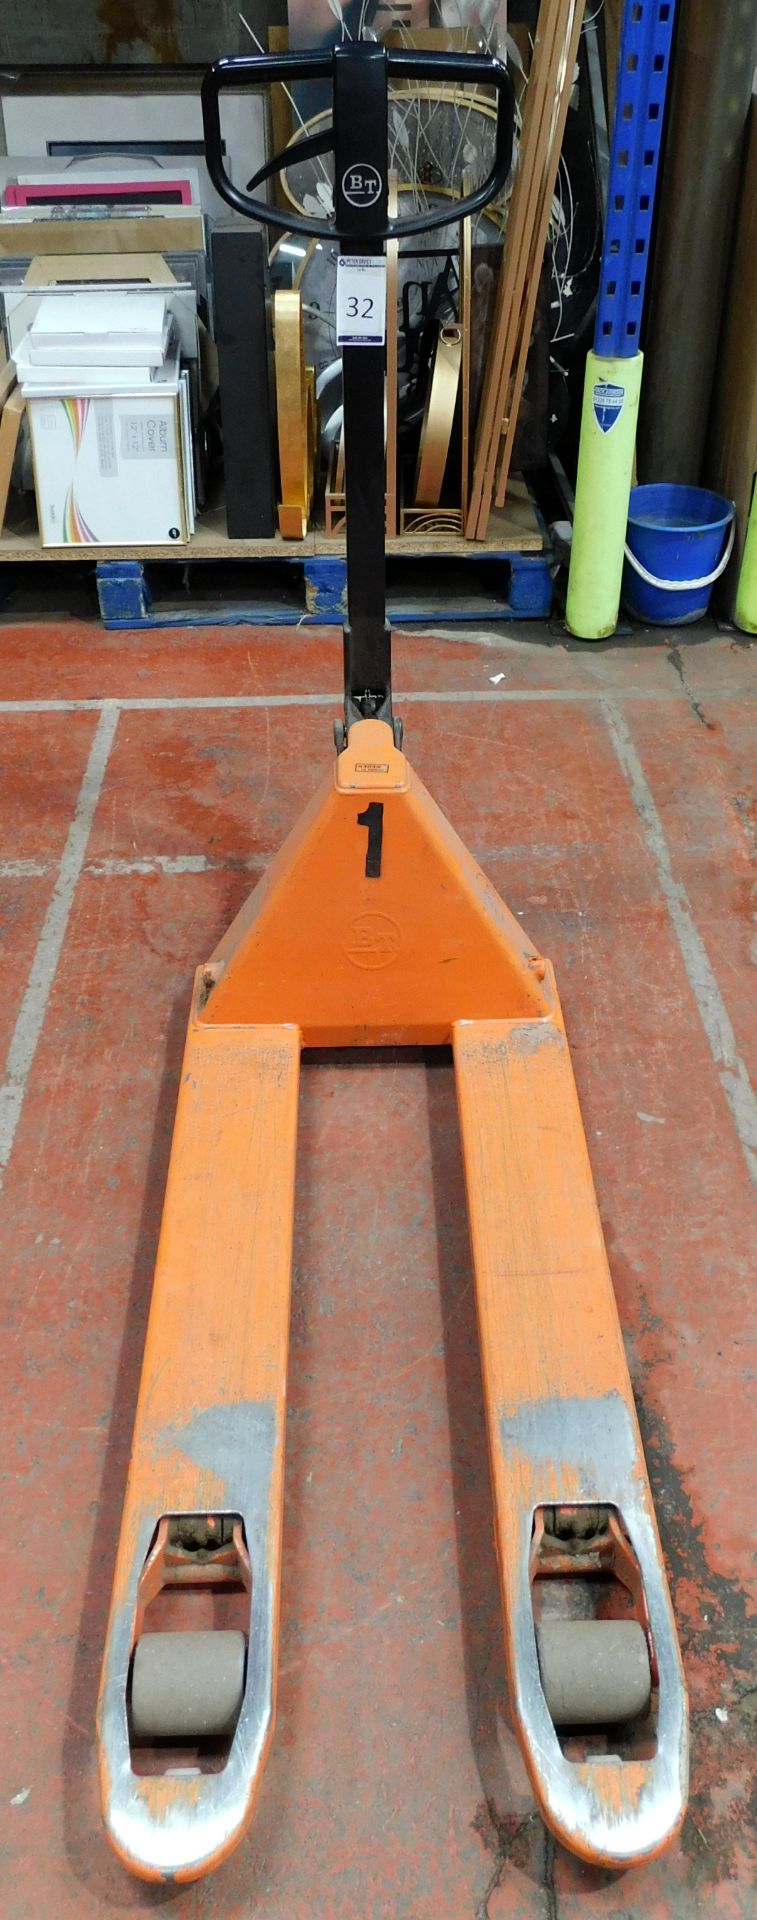 Narrow Blade BT Rolatruc Pallet Truck (Collection – Friday 25th, Tuesday 29th or Wednesday 30th